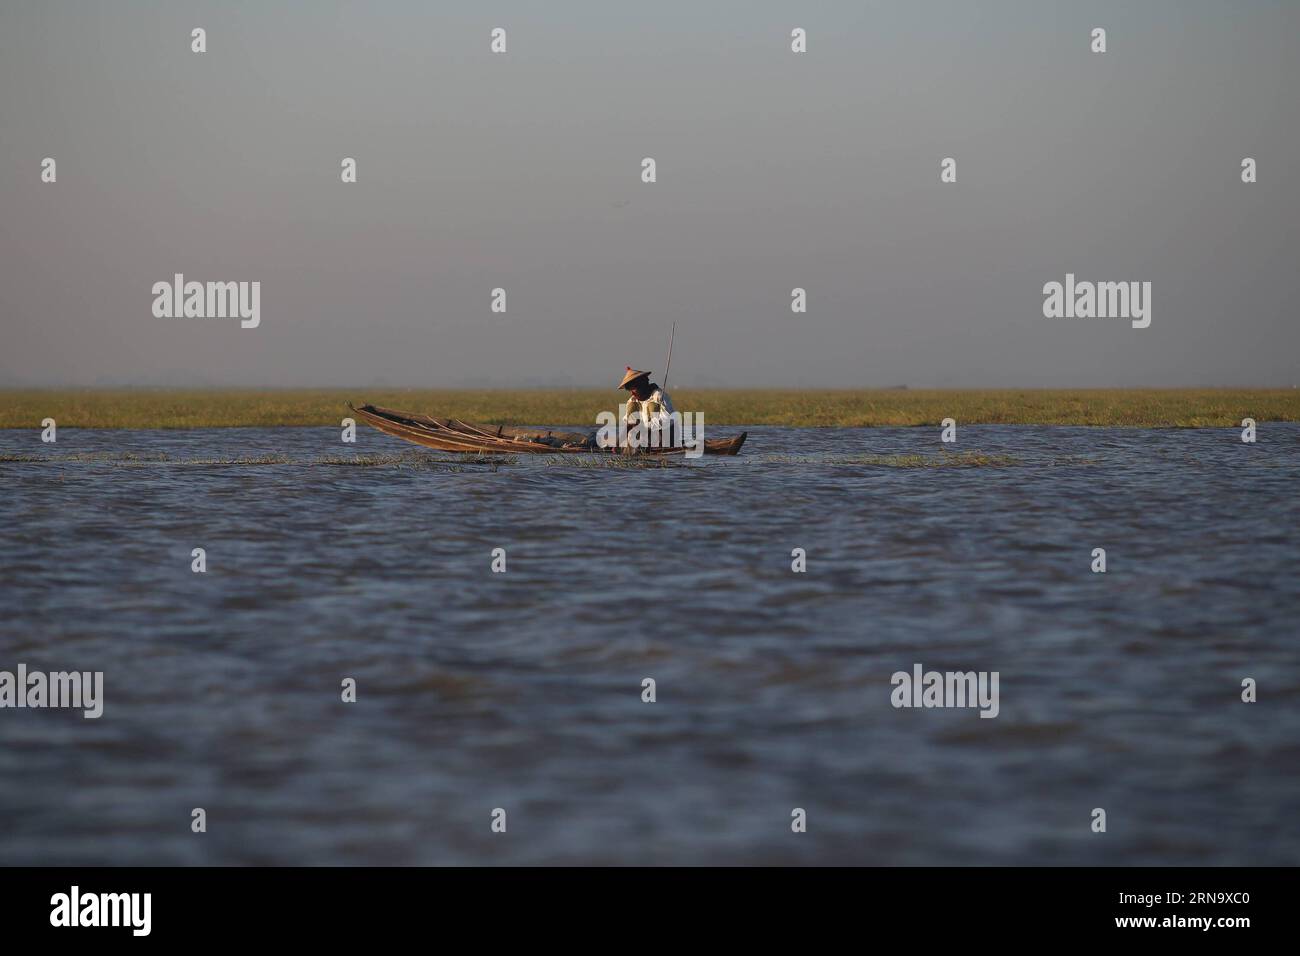 (151223) -- BAGO, Dec. 23, 2015 -- A fisherman works at Moeyungyi Wetland Wildlife Sanctuary in Bago region, Myanmar, Dec. 23, 2015. Moeyungyi Wetlands is situated in Bago Division. Every year, millions of birds usually fly from the northern hemisphere to the south along the East-Asian Australian Flyway to escape from winter. They stop to rest and feed in Asia. So the flyway contains a network of wetlands and Moeyungyi is one of which could cooperate to certain migrated as well as domestic birds. ) MYANMAR-BAGO-WETLAND-WILDLIFE UxAung PUBLICATIONxNOTxINxCHN   151223 Bago DEC 23 2015 a Fisherma Stock Photo